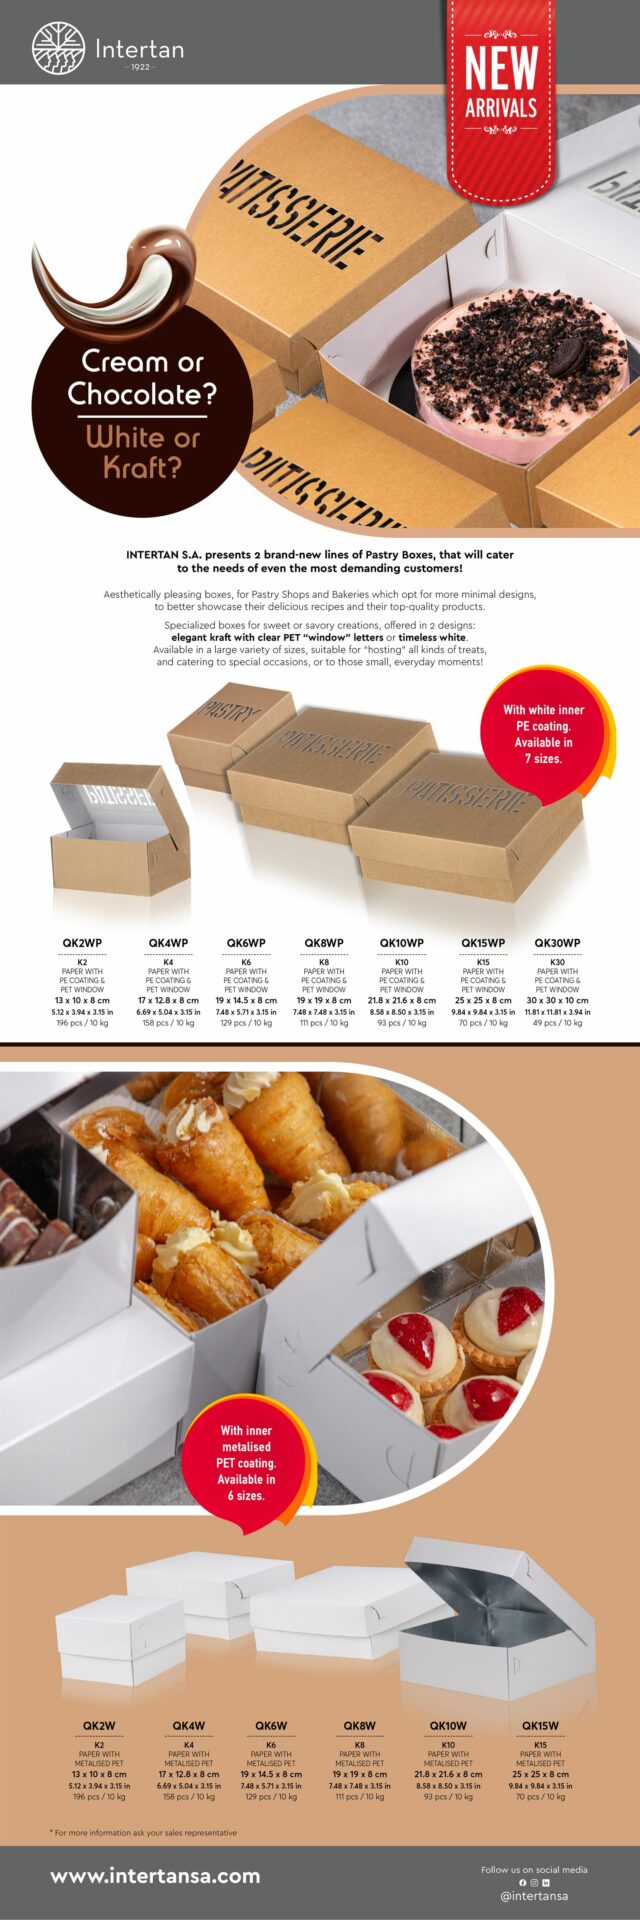 Pastry Boxes Newsletter | Intertan S.A.